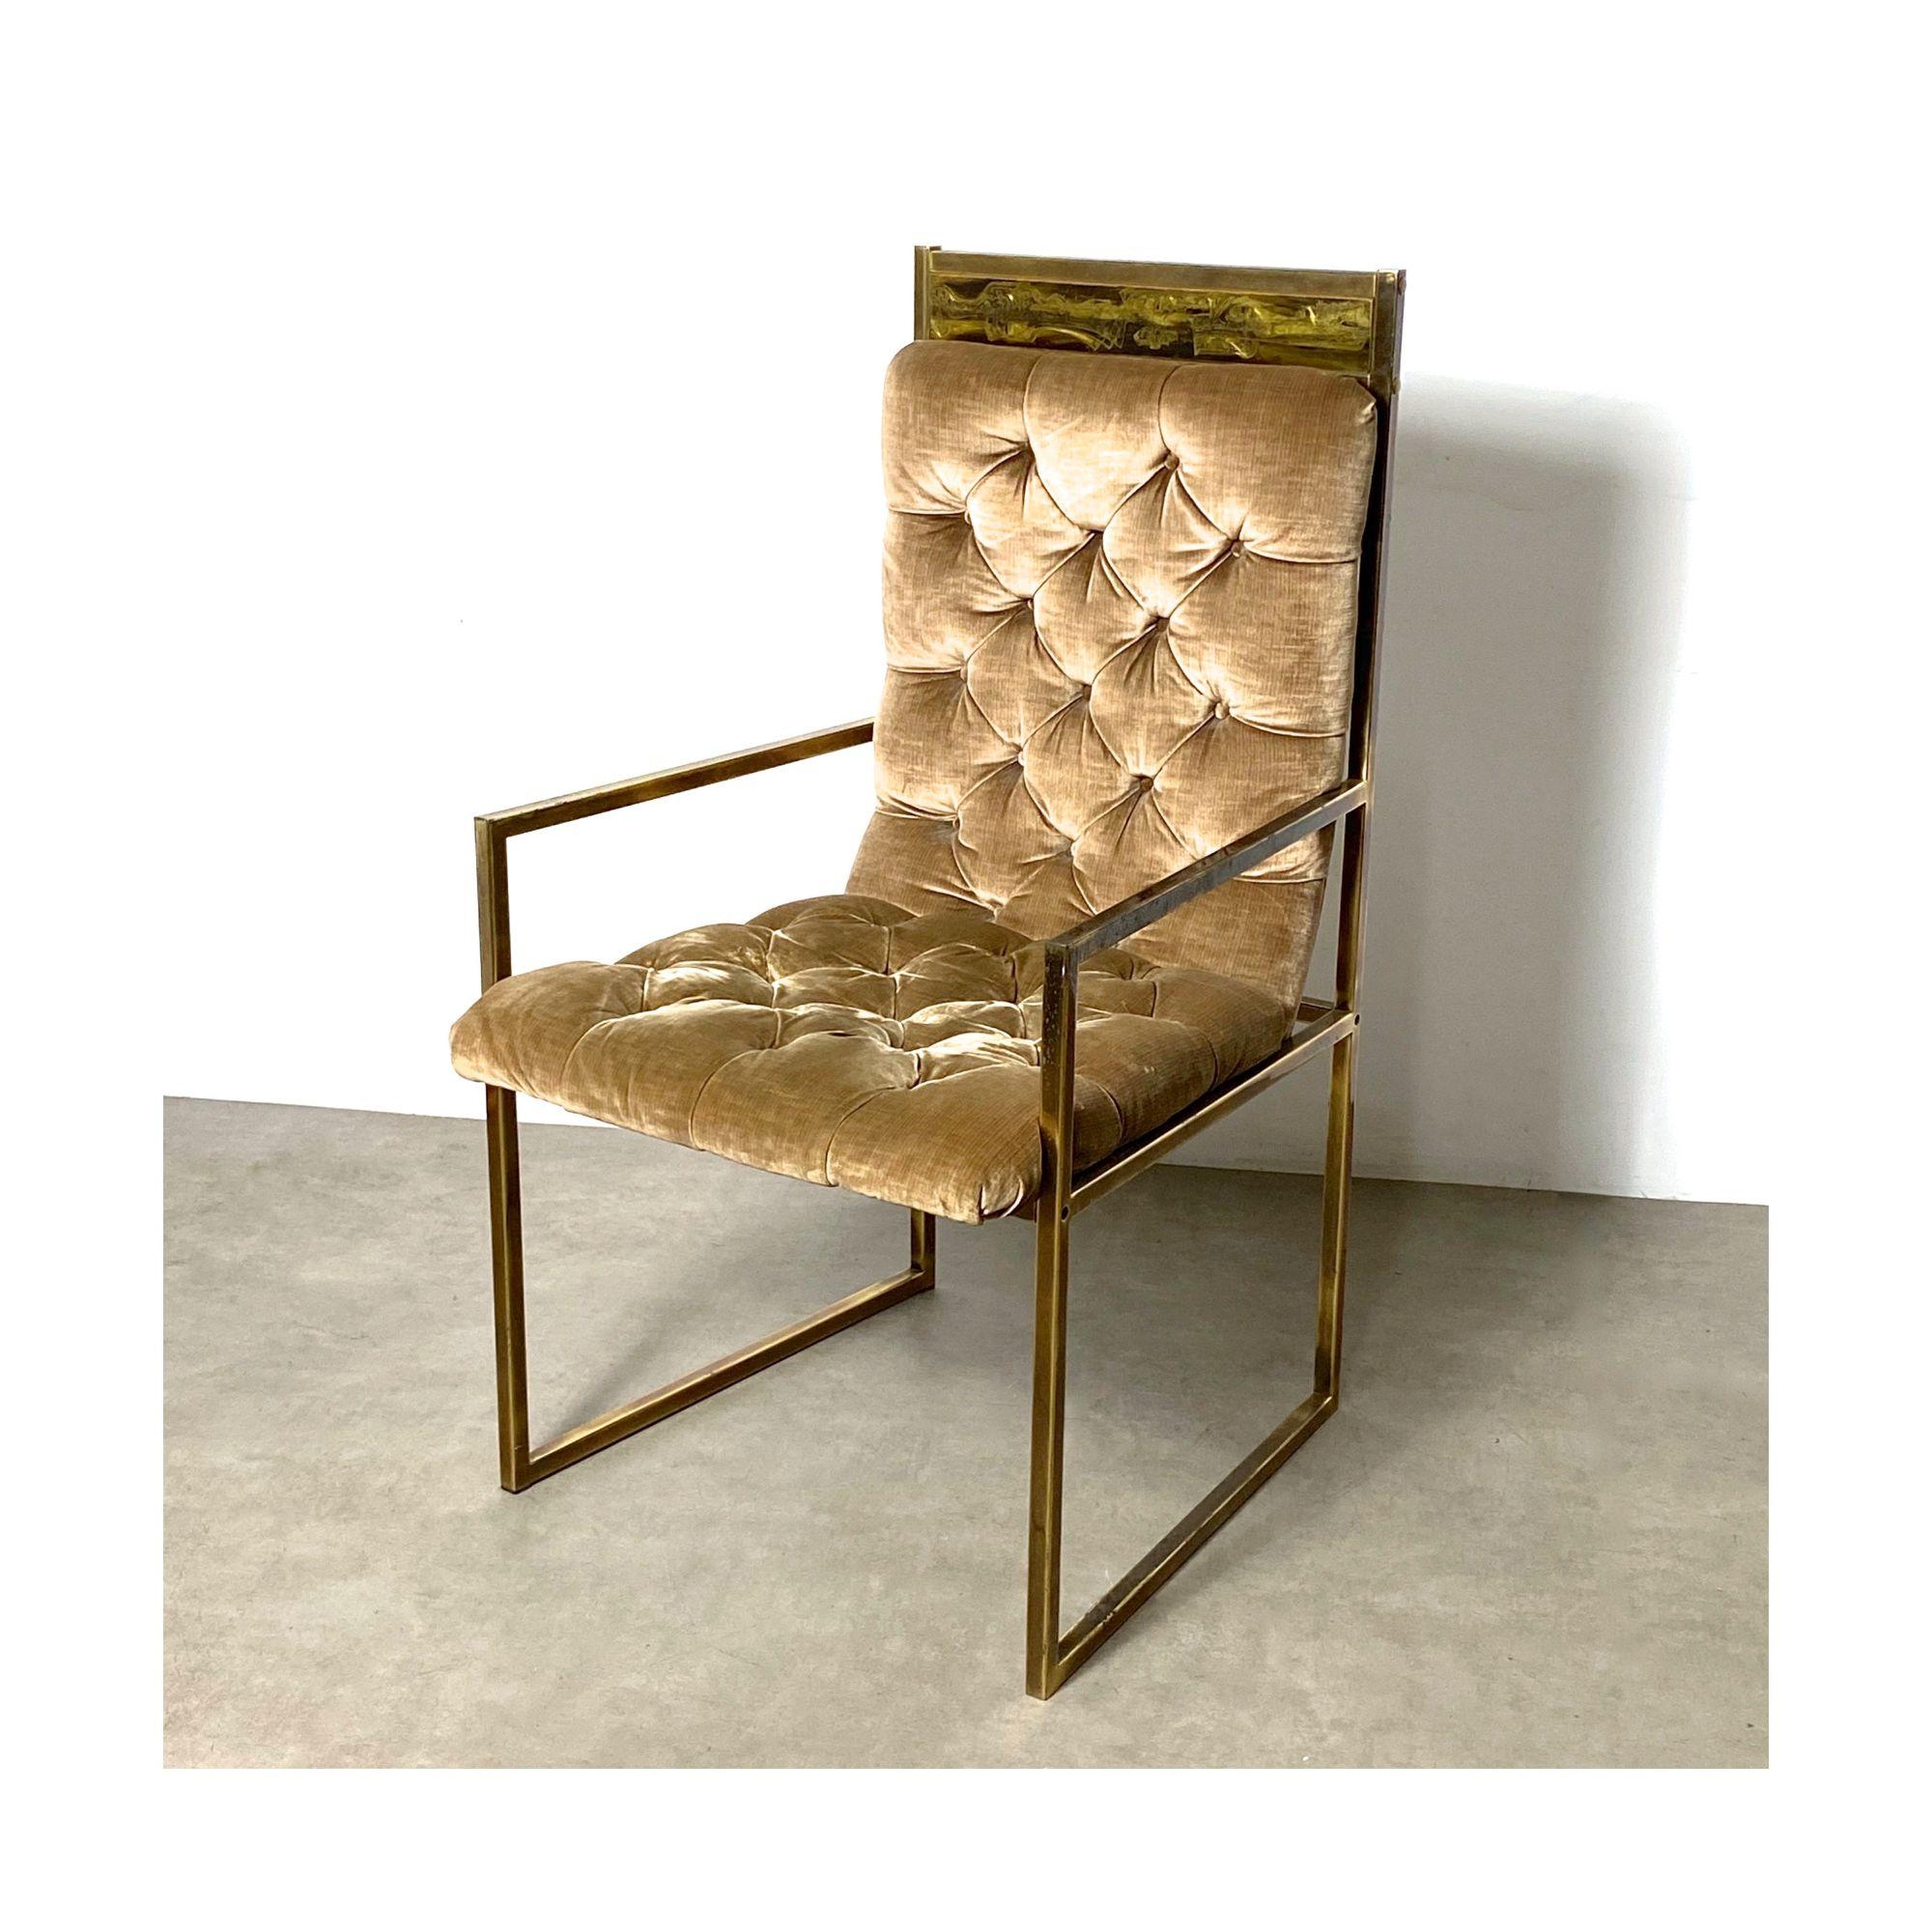 Bernhard Rohne Mastercraft Acid Etched Armchair

Rare armchair designed by Bernhard Rohne for Mastercraft circa 1970s
Brass frame with sloped tufted seat in original champagne velvet with signature acid etched brass upper detail 

Additional